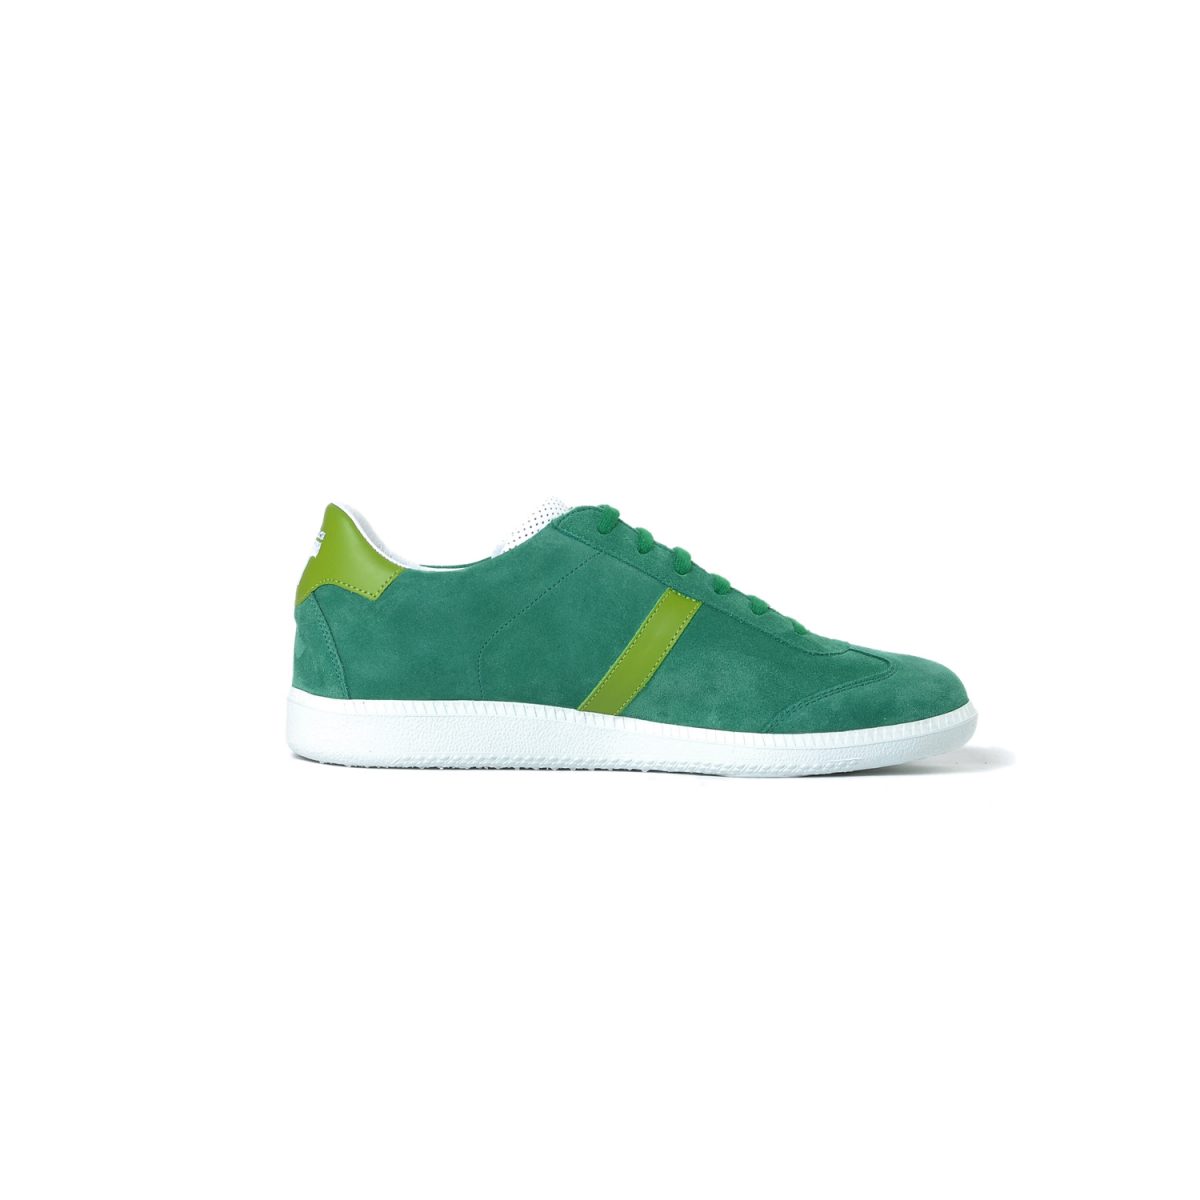 Tisza shoes - Comfort - Green-lime